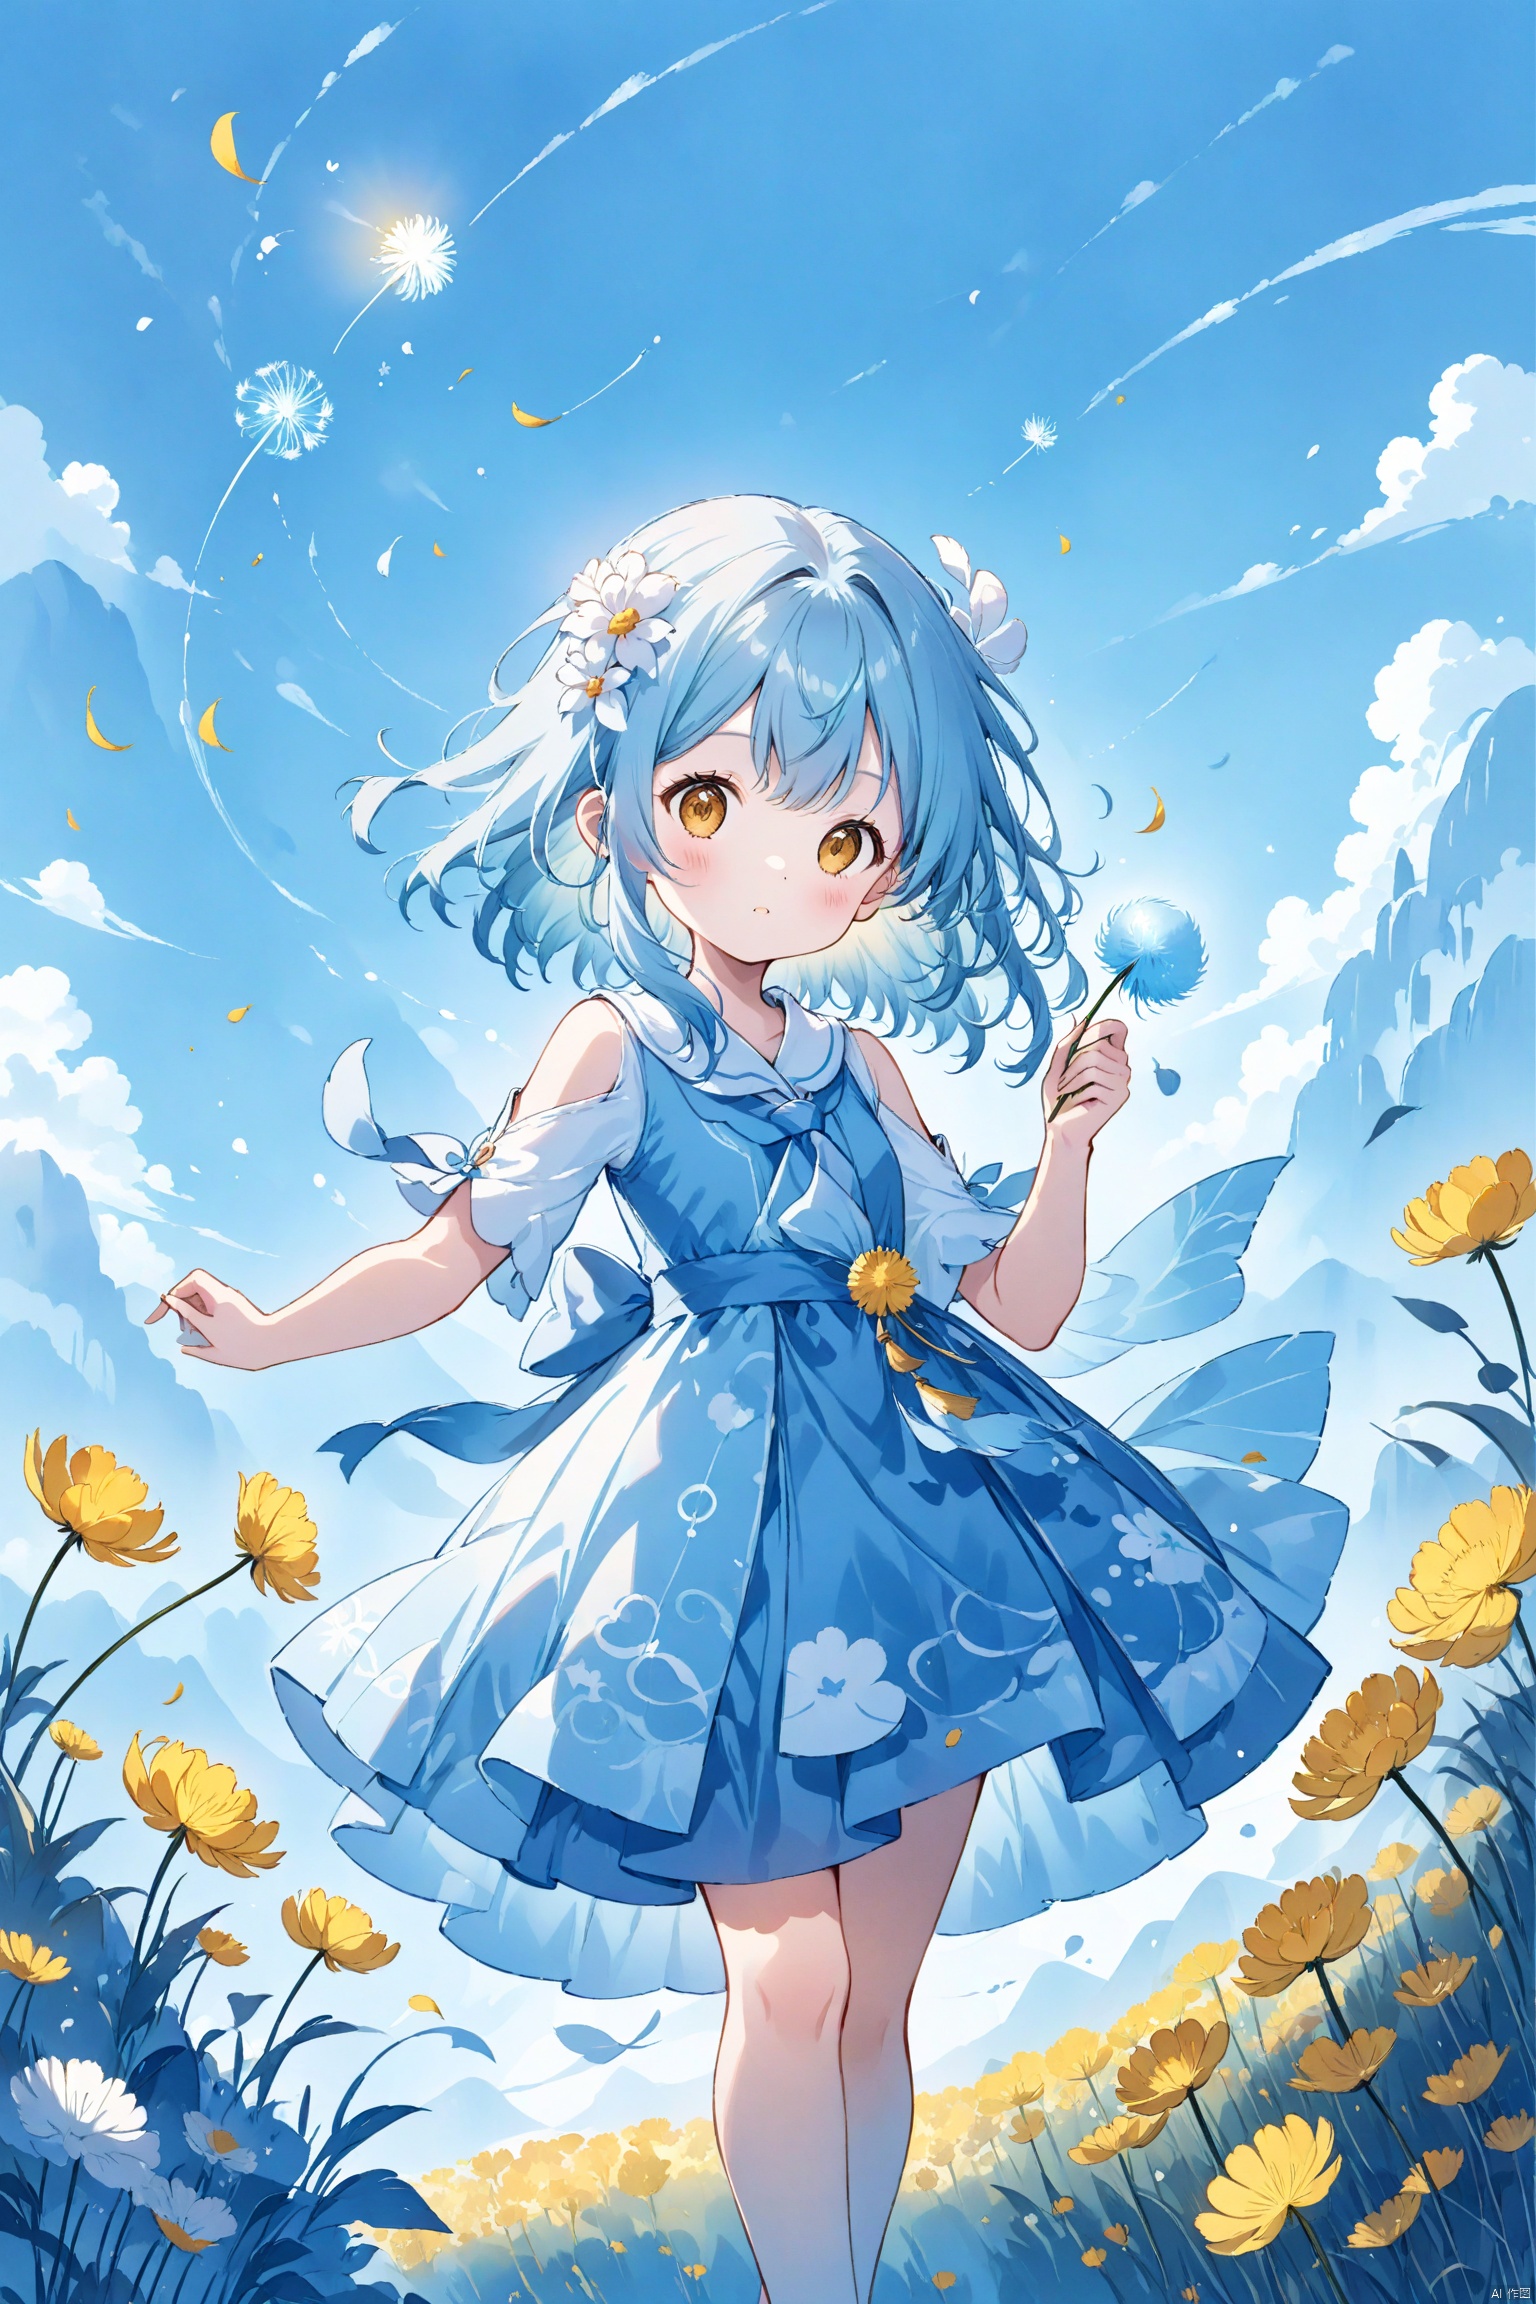  blue theme,Tie dyeing,A girl holding a dandelion flower, wearing a blue dress with white dots and yellow flowers on it, blowing away small petals in the style of light skyblue and pale aquamarine illustrations, a simple line drawing reminiscent of children's book illustrations and storybook art, with colorful cartooning and playful character design,lumine